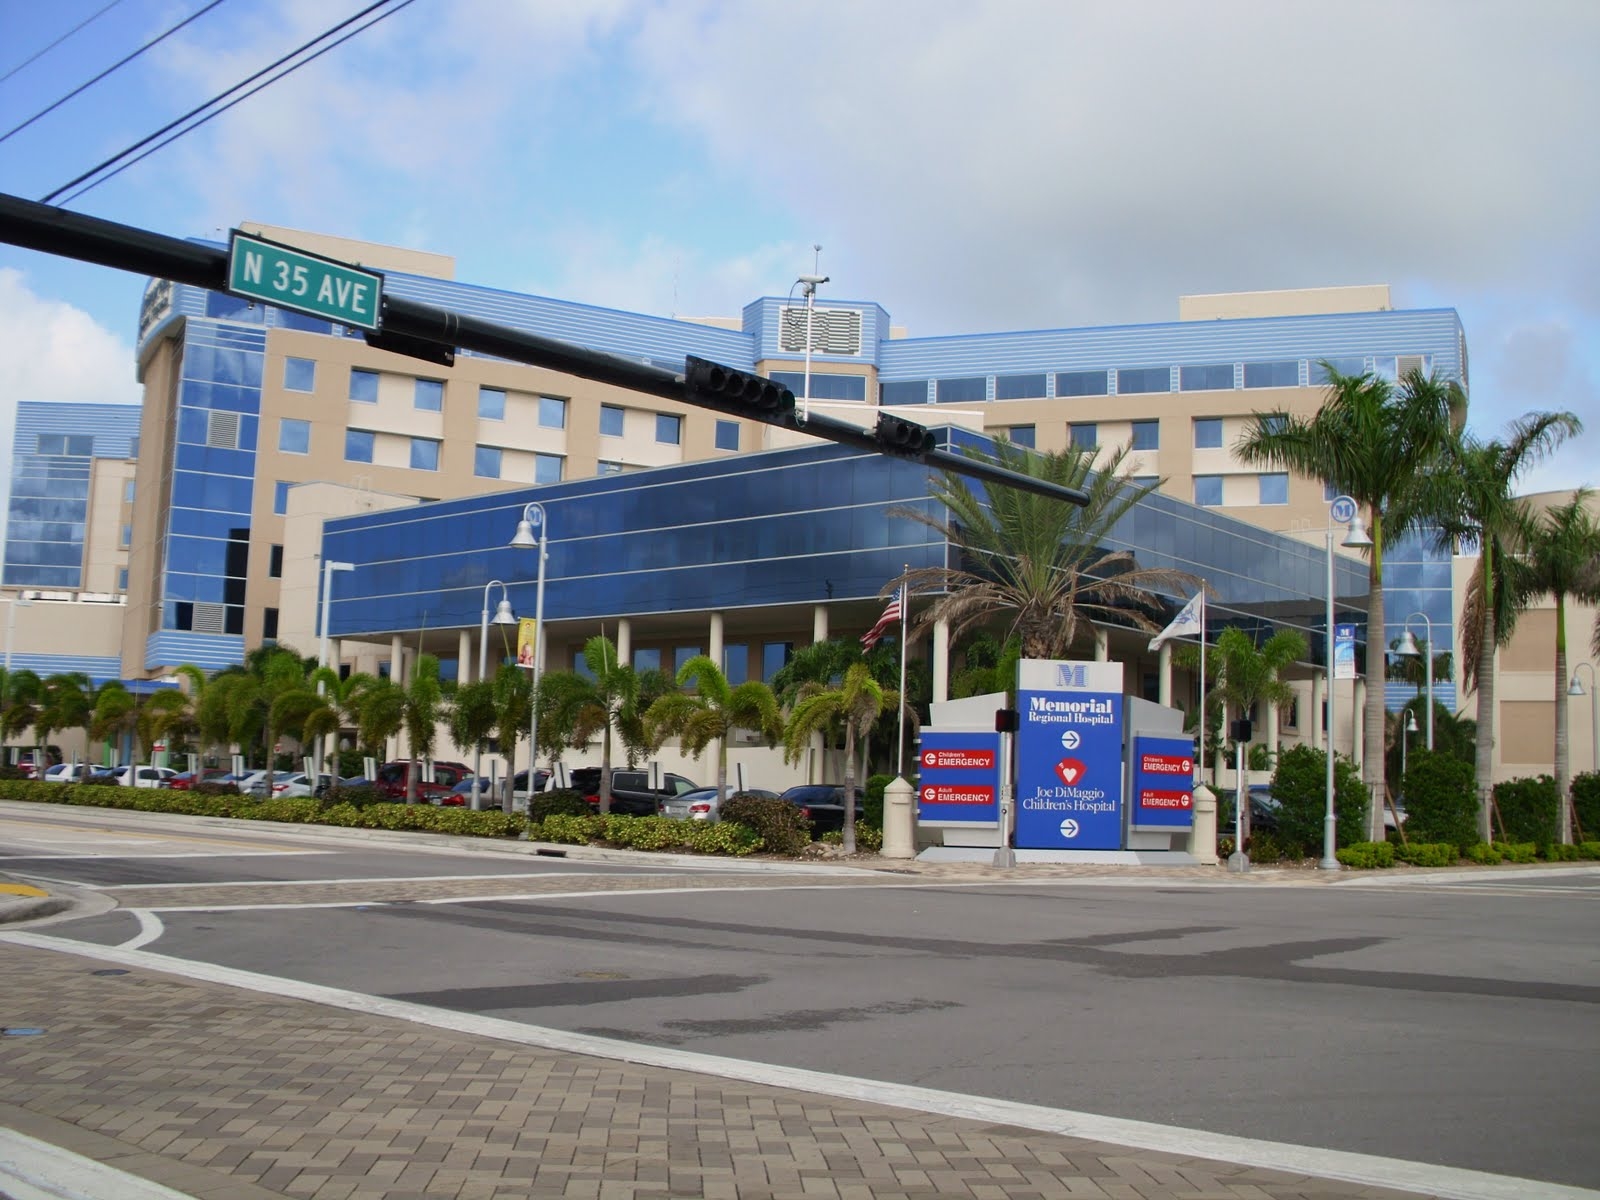 Memorial Regional Hospital Miami - Wasie Neonatal Intensive Care Unit (NICU) which provides level II and level III care for newborns with complications, and is one of only 11 Regional Perinatal Intensive Care Centers in Florida.  Simply put, at the Family Birthplace, some of the most experienced maternity staff, physicians and neonatologist specialists in the country are only footsteps away.  Education Classes and Support for New Parents The Family Birthplace at Memorial offers a childbirth education program called Expectations and Beyond which features classes on pregnancy planning, childbirth preparation, baby care, infant CPR and more. Classes should be taken beginning the mother's 20th week of pregnancy. From support groups for nursing mothers to a boot camp for new dads, resources are available even after you leave the hospital. Class registration is easy. Go to our online Class Information Request form or call 954-265-5930. Our high-quality maternity services are also available at Memorial Hospital West and  Memorial Hospital Miramar.   Is Your Doctor a Memorial Doctor? To find a physician who is committed to maternity and birthing care, call Memorial Physician Referral Service toll-free at (800) 944-DOCS. We're available 24 hours a day, 7 days a week.